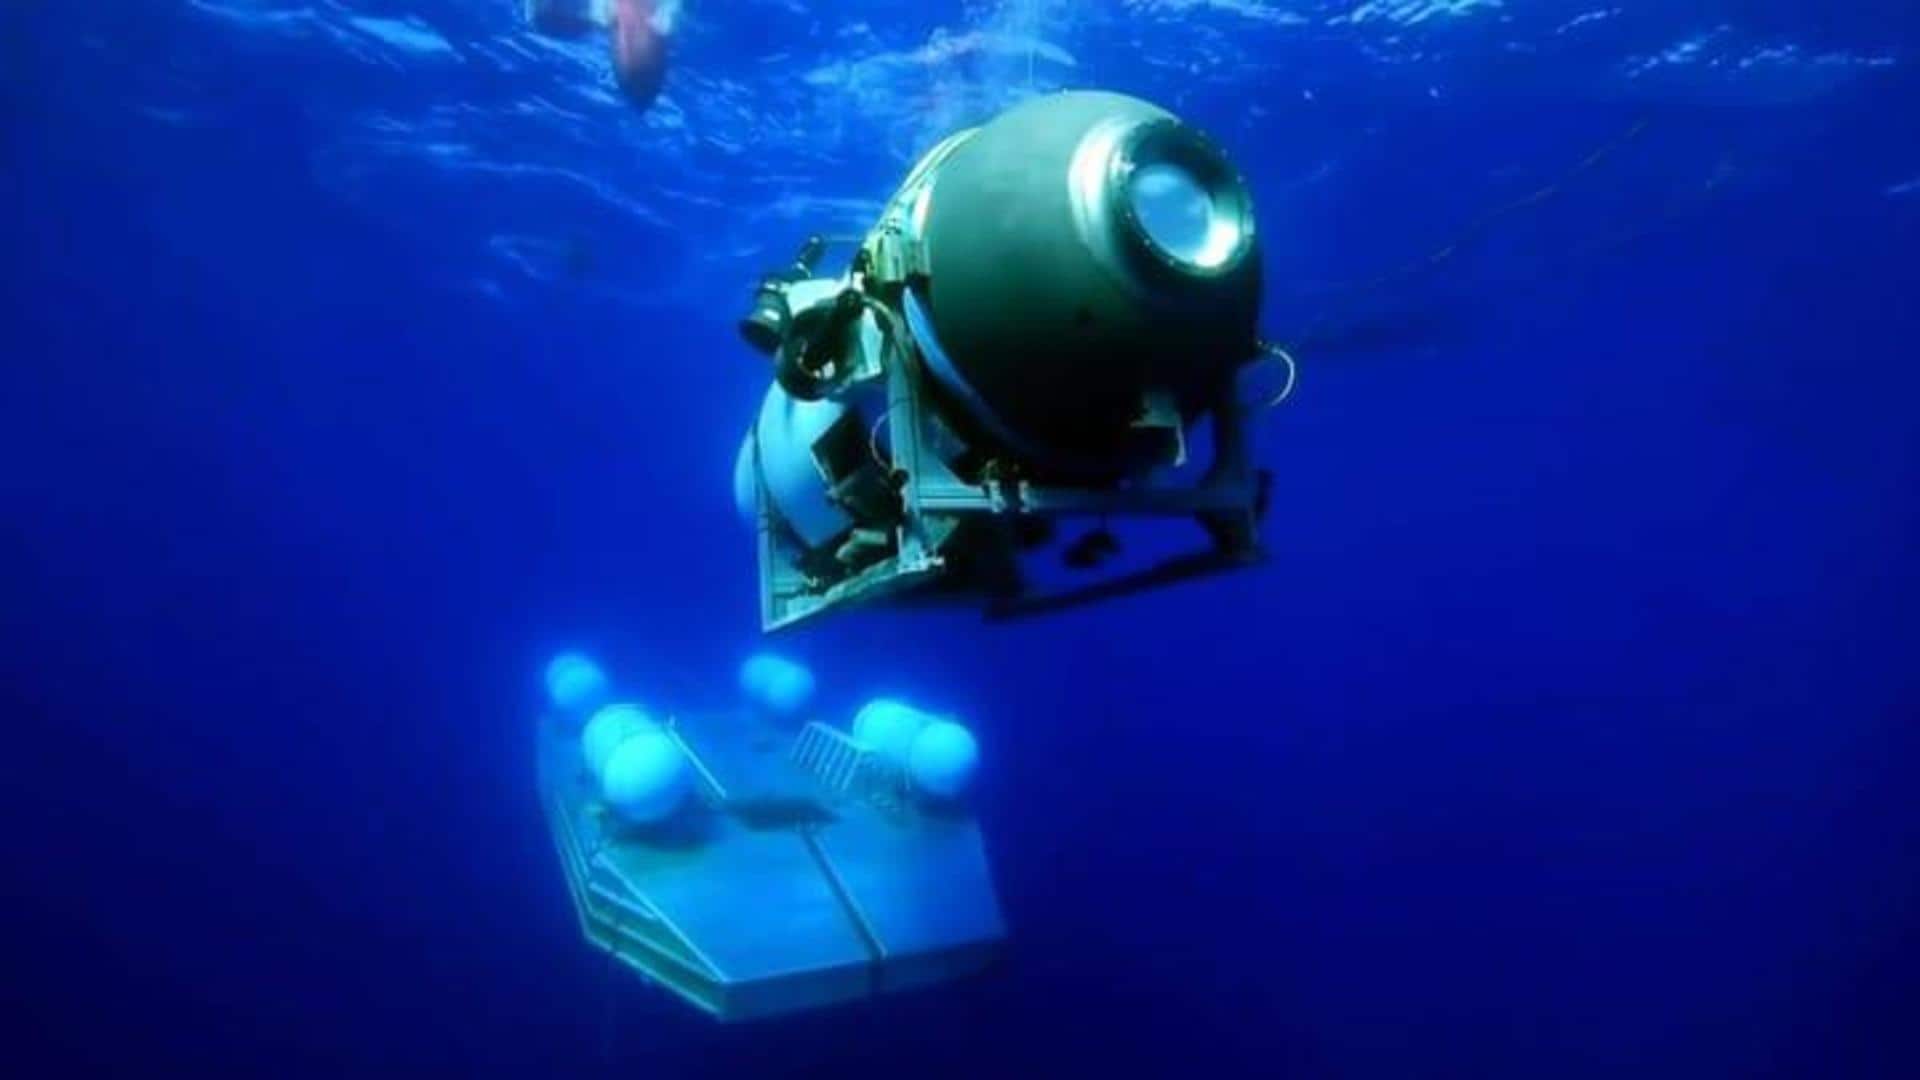 Missing Titan submarine: Vessel reportedly out of oxygen, hopes diminish